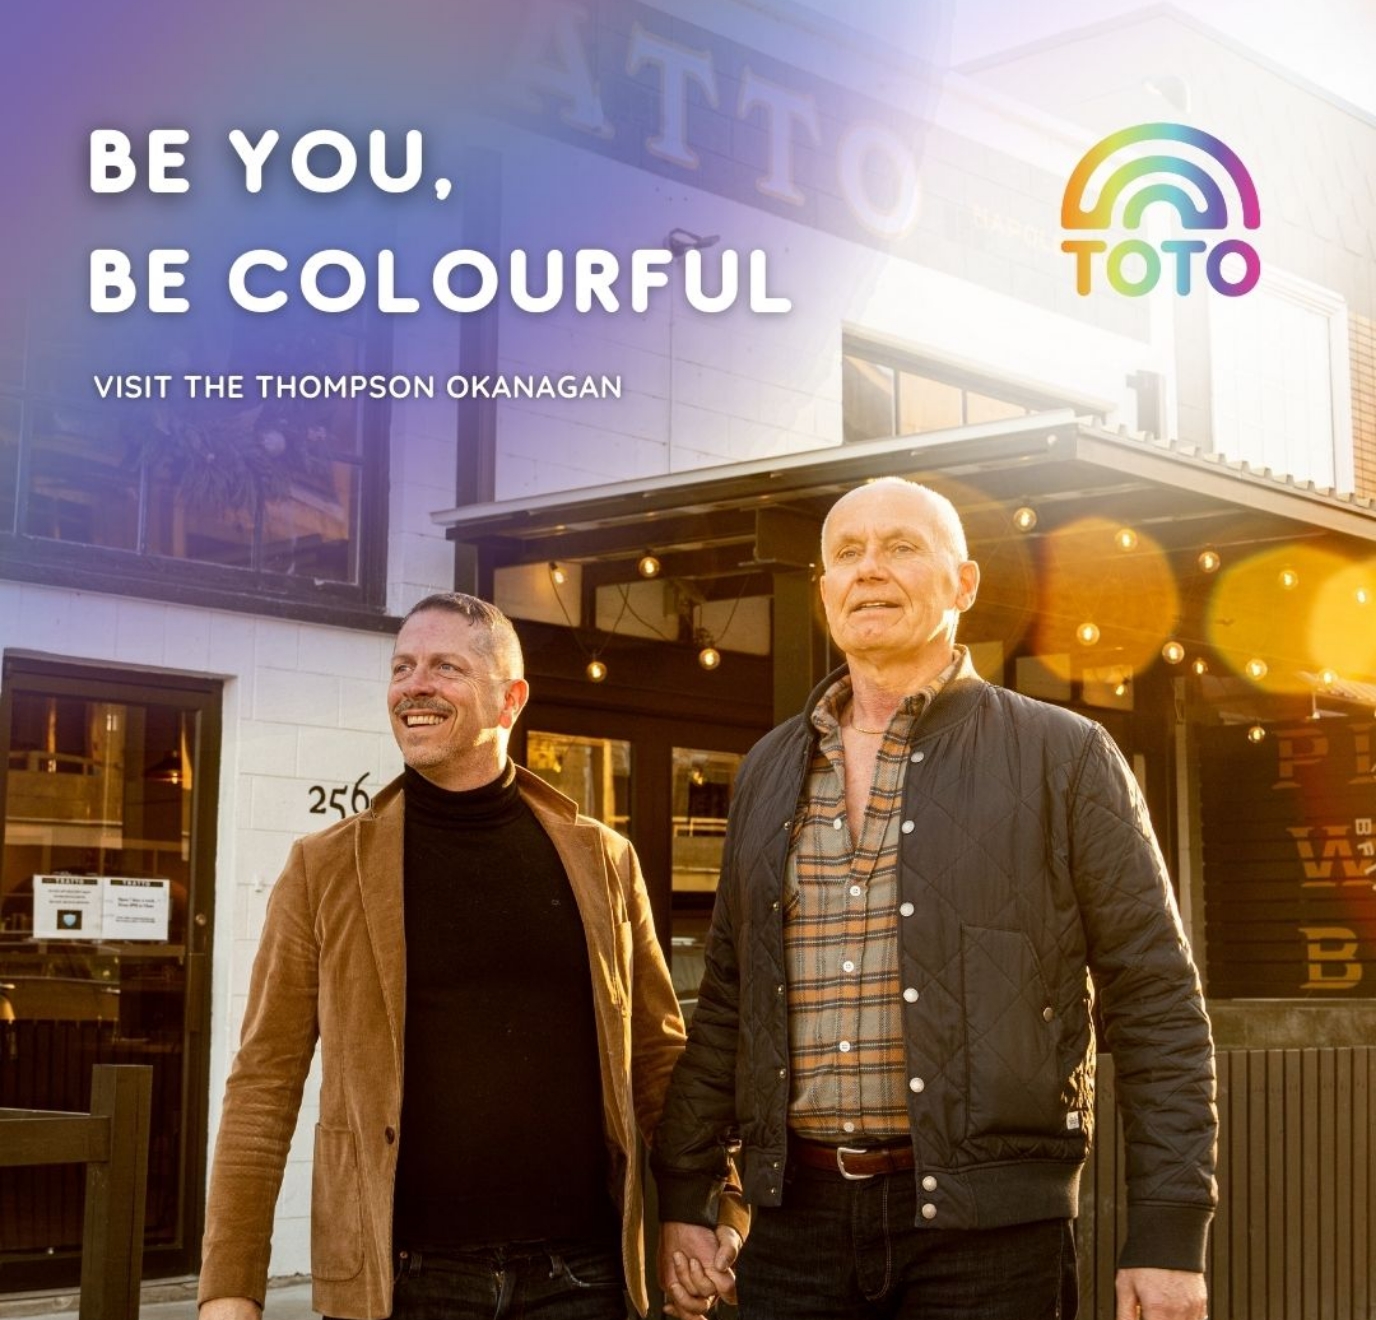 TOTO social media marketing Be Colourful campaign older gay couple